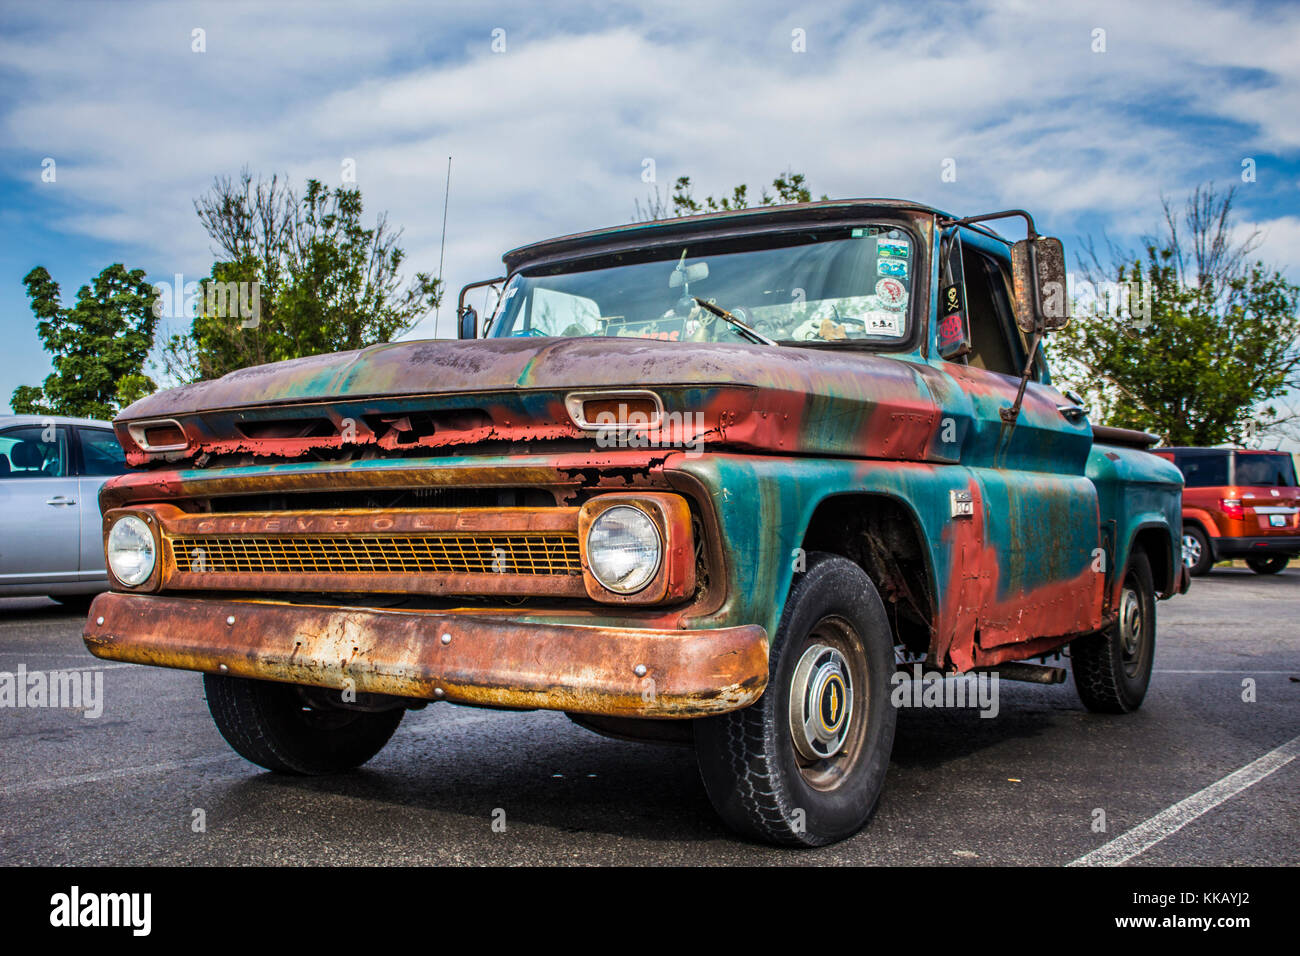 Old truck in a parking lot on a cloudy day. Stock Photo